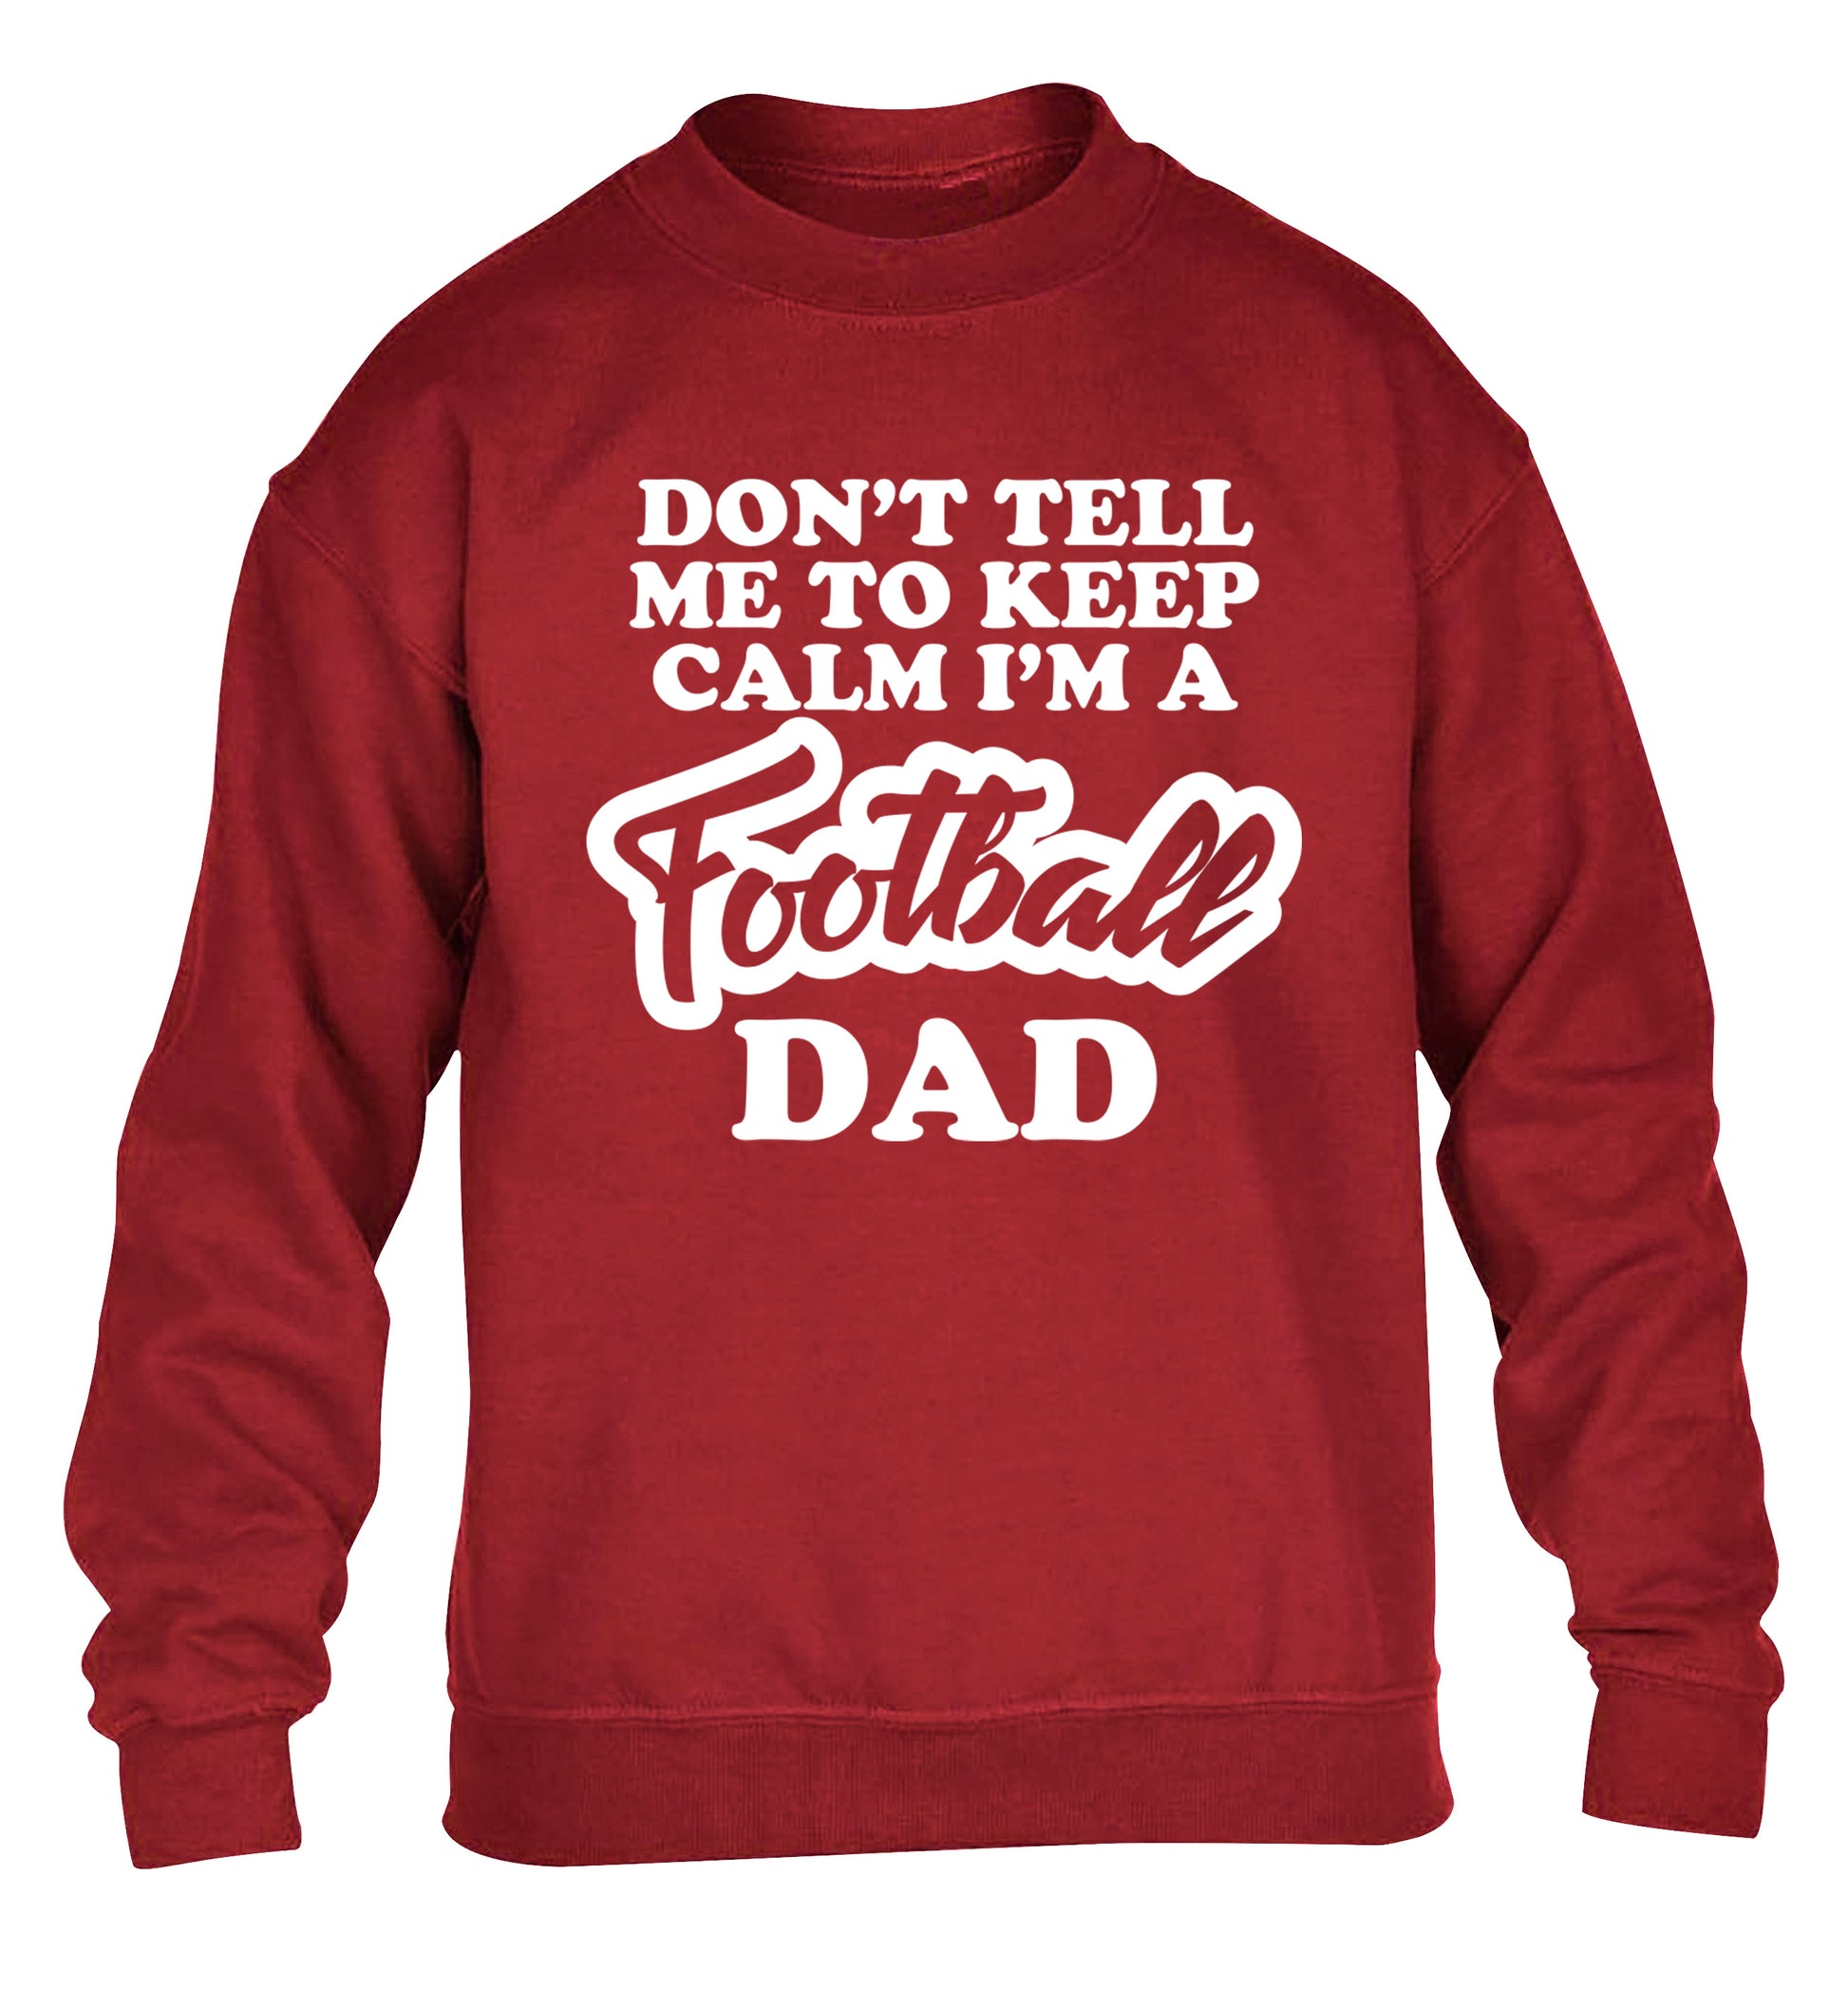 Don't tell me to keep calm I'm a football grandad children's grey sweater 12-14 Years